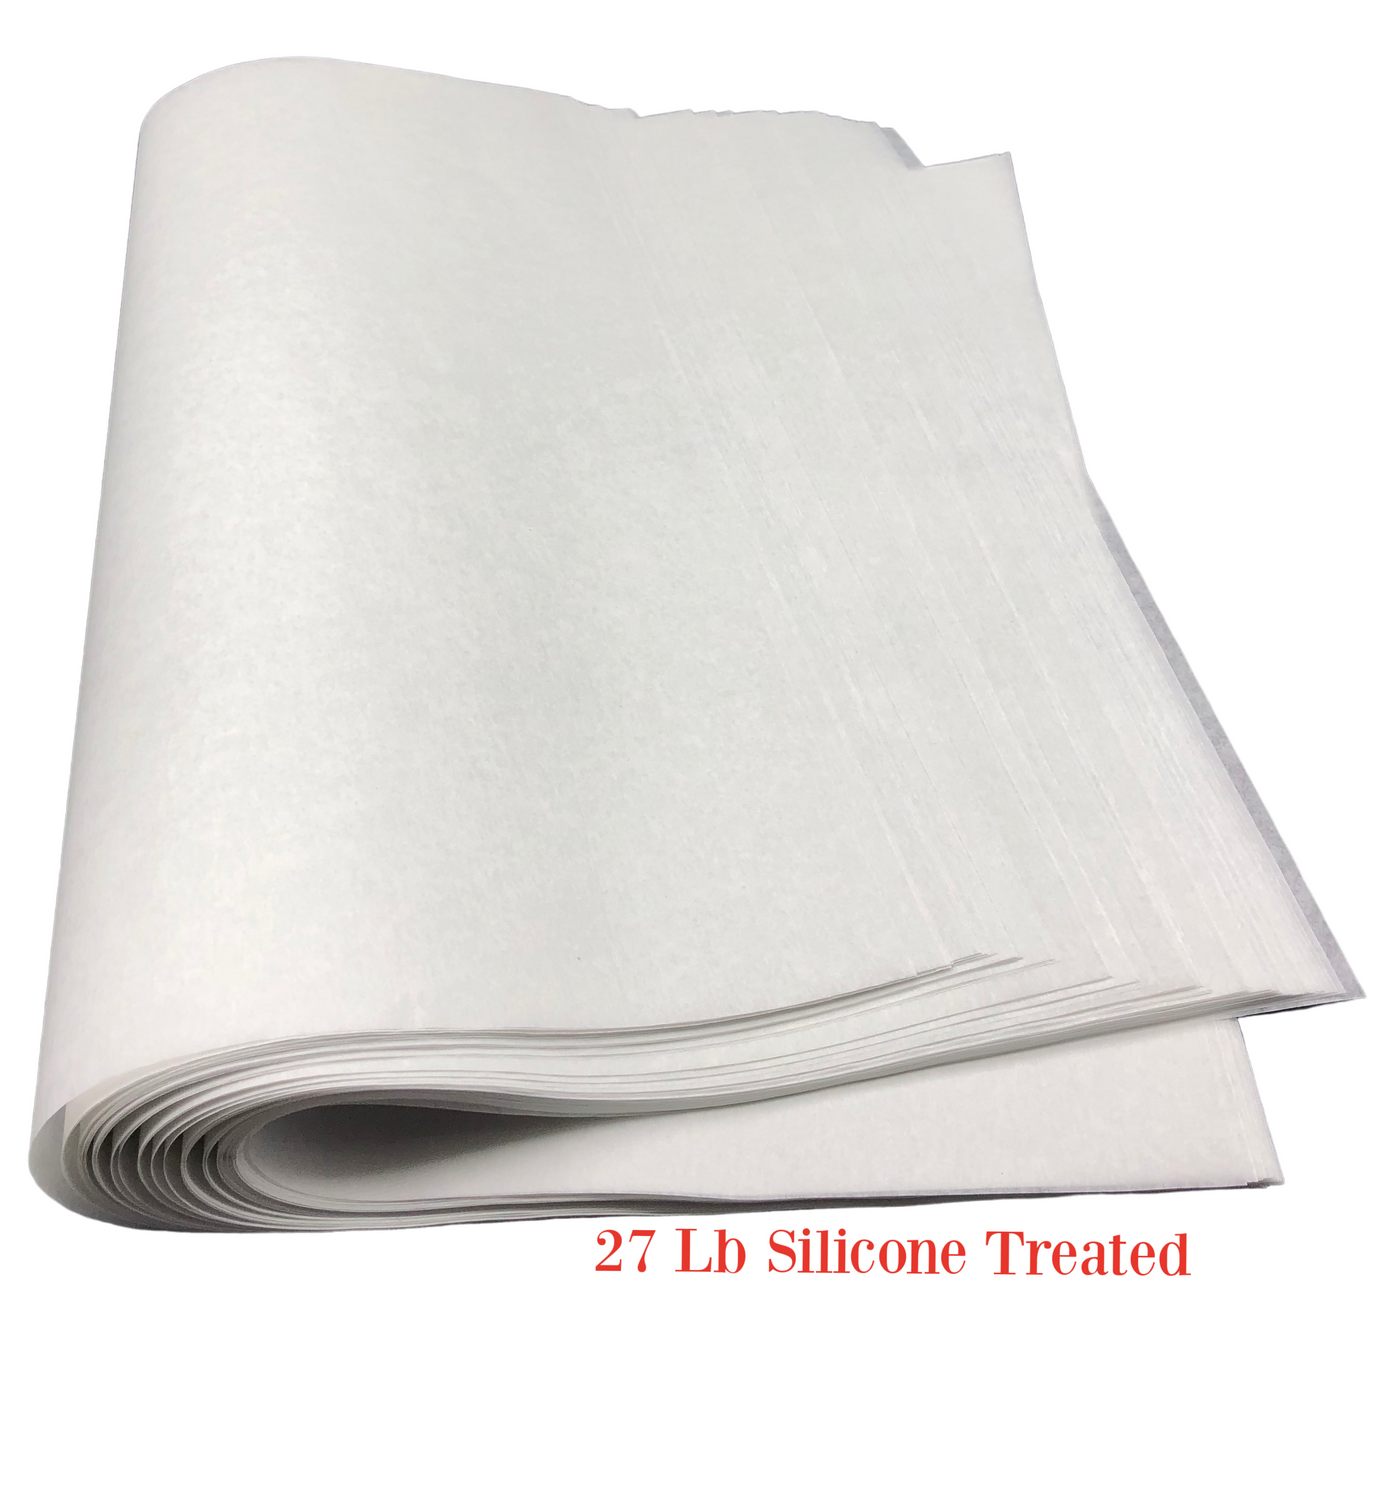 Silicone Coated #27LB Baking Parchment Paper Sheets (Various Sizes